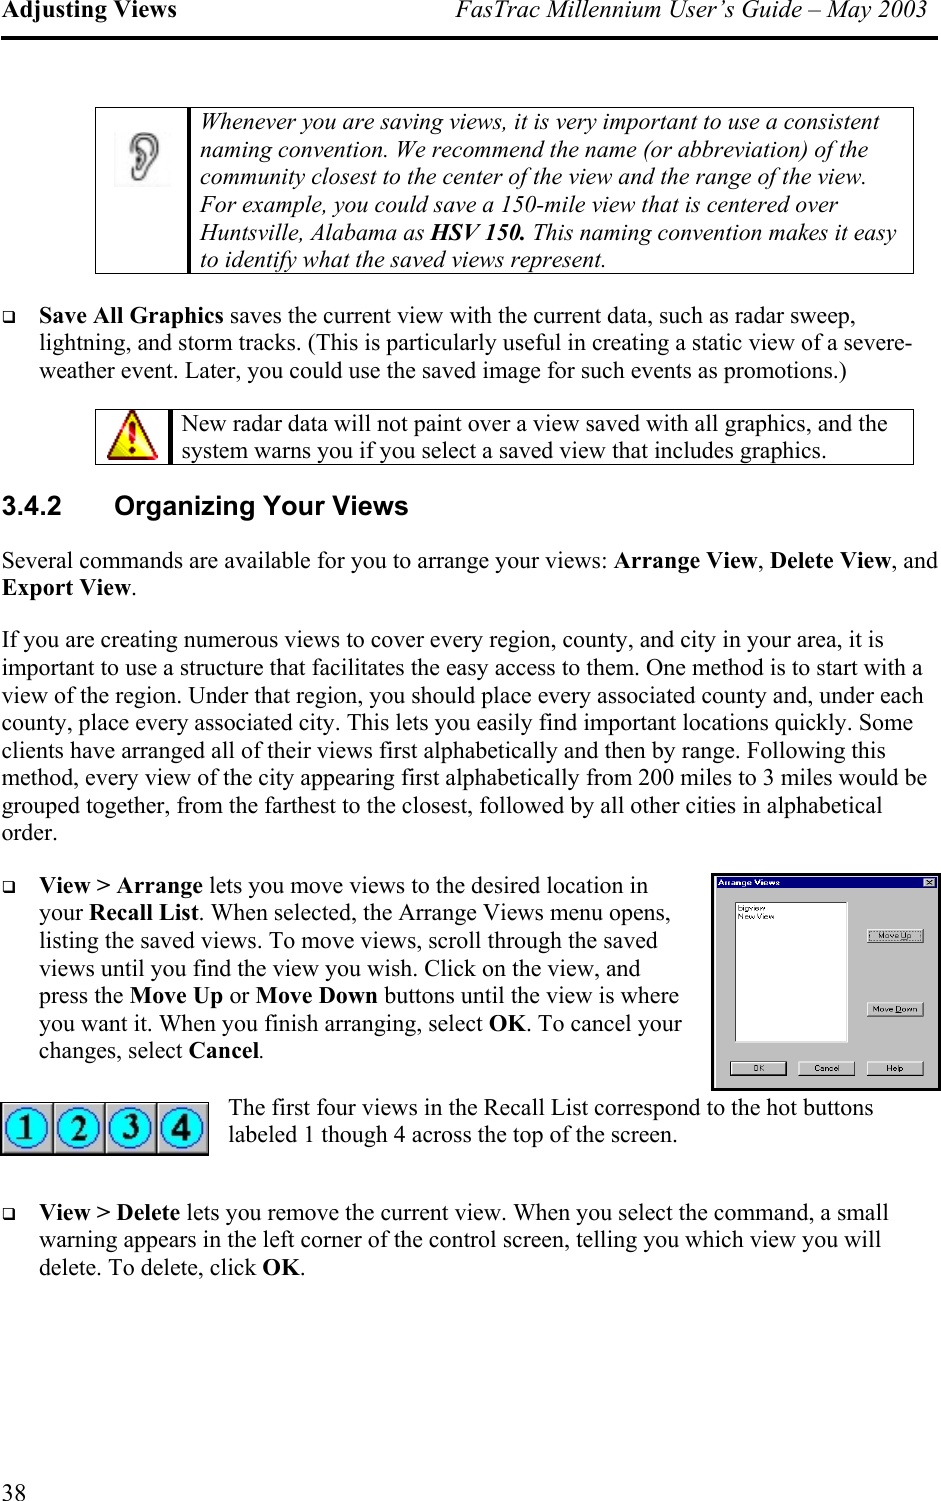 Adjusting Views  FasTrac Millennium User’s Guide – May 2003  Whenever you are saving views, it is very important to use a consistent naming convention. We recommend the name (or abbreviation) of the community closest to the center of the view and the range of the view. For example, you could save a 150-mile view that is centered over Huntsville, Alabama as HSV 150. This naming convention makes it easy to identify what the saved views represent.    Save All Graphics saves the current view with the current data, such as radar sweep, lightning, and storm tracks. (This is particularly useful in creating a static view of a severe-weather event. Later, you could use the saved image for such events as promotions.)    New radar data will not paint over a view saved with all graphics, and the system warns you if you select a saved view that includes graphics.  3.4.2  Organizing Your Views Several commands are available for you to arrange your views: Arrange View, Delete View, and Export View. If you are creating numerous views to cover every region, county, and city in your area, it is important to use a structure that facilitates the easy access to them. One method is to start with a view of the region. Under that region, you should place every associated county and, under each county, place every associated city. This lets you easily find important locations quickly. Some clients have arranged all of their views first alphabetically and then by range. Following this method, every view of the city appearing first alphabetically from 200 miles to 3 miles would be grouped together, from the farthest to the closest, followed by all other cities in alphabetical order.   View &gt; Arrange lets you move views to the desired location in your Recall List. When selected, the Arrange Views menu opens, listing the saved views. To move views, scroll through the saved views until you find the view you wish. Click on the view, and press the Move Up or Move Down buttons until the view is where you want it. When you finish arranging, select OK. To cancel your changes, select Cancel. The first four views in the Recall List correspond to the hot buttons labeled 1 though 4 across the top of the screen.    View &gt; Delete lets you remove the current view. When you select the command, a small warning appears in the left corner of the control screen, telling you which view you will delete. To delete, click OK. 38 